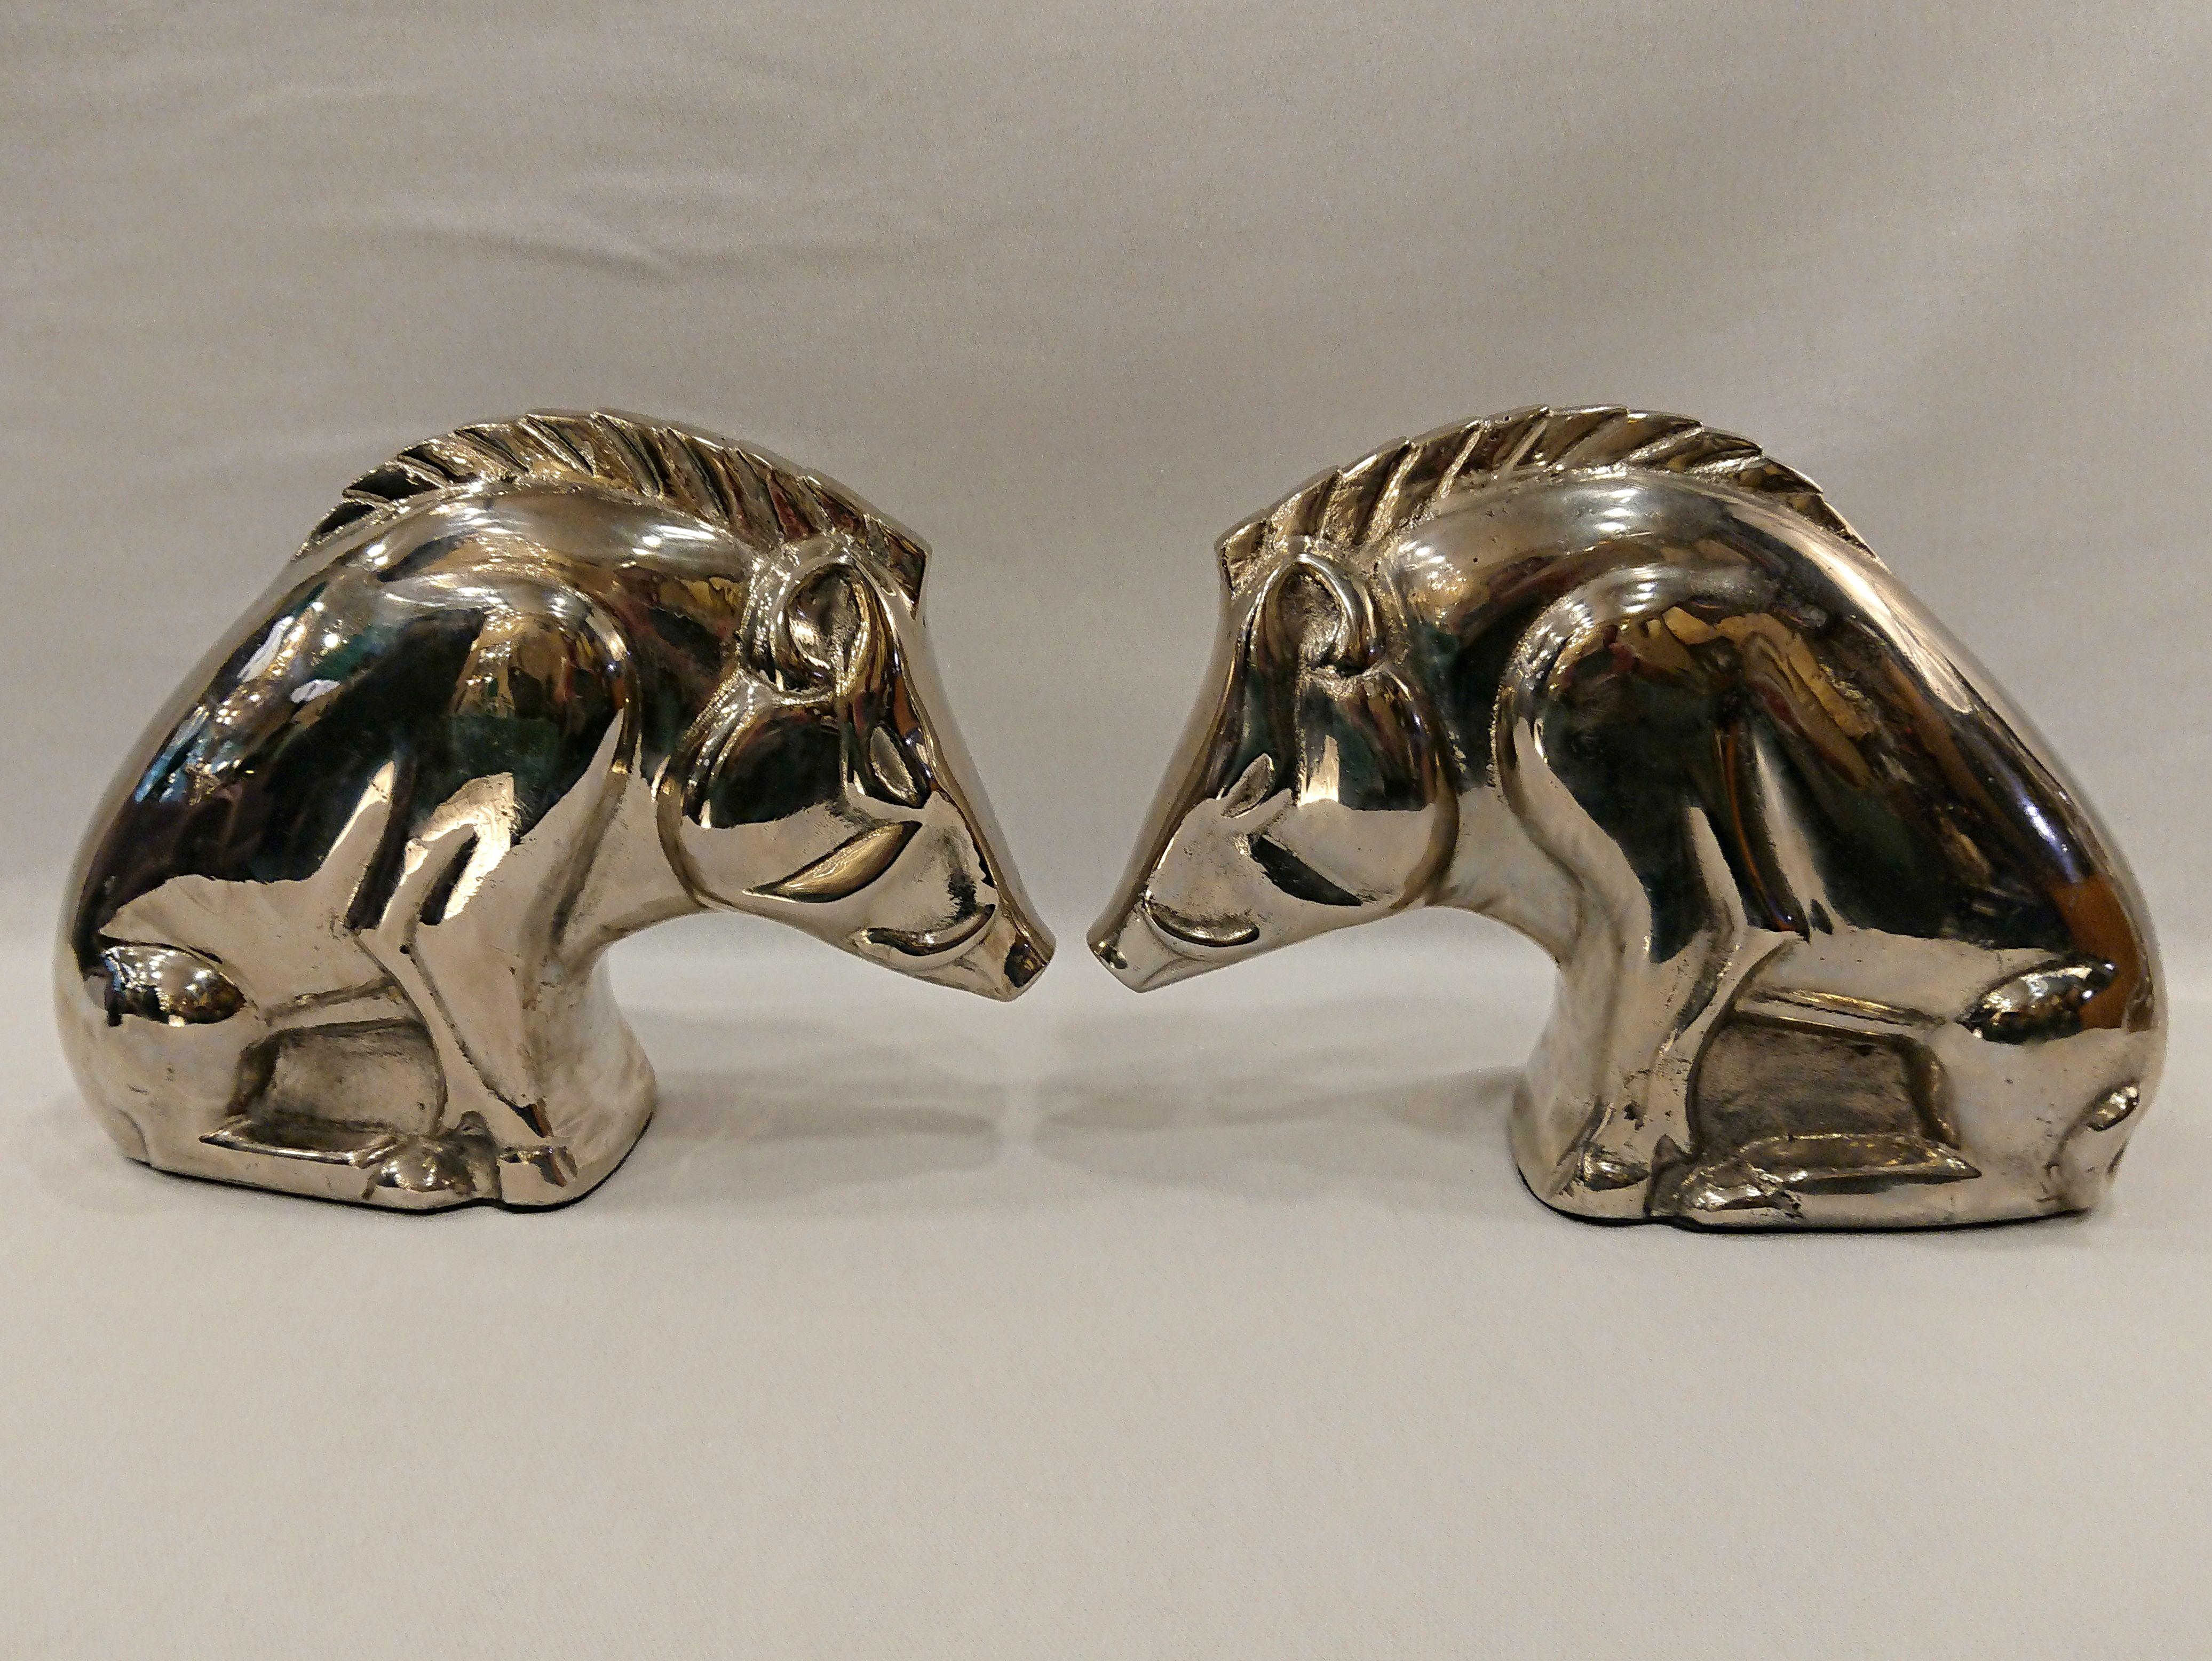 Pair of French Art Deco Nickel-Plated Brass Bookends, 1930-1940 For Sale 8